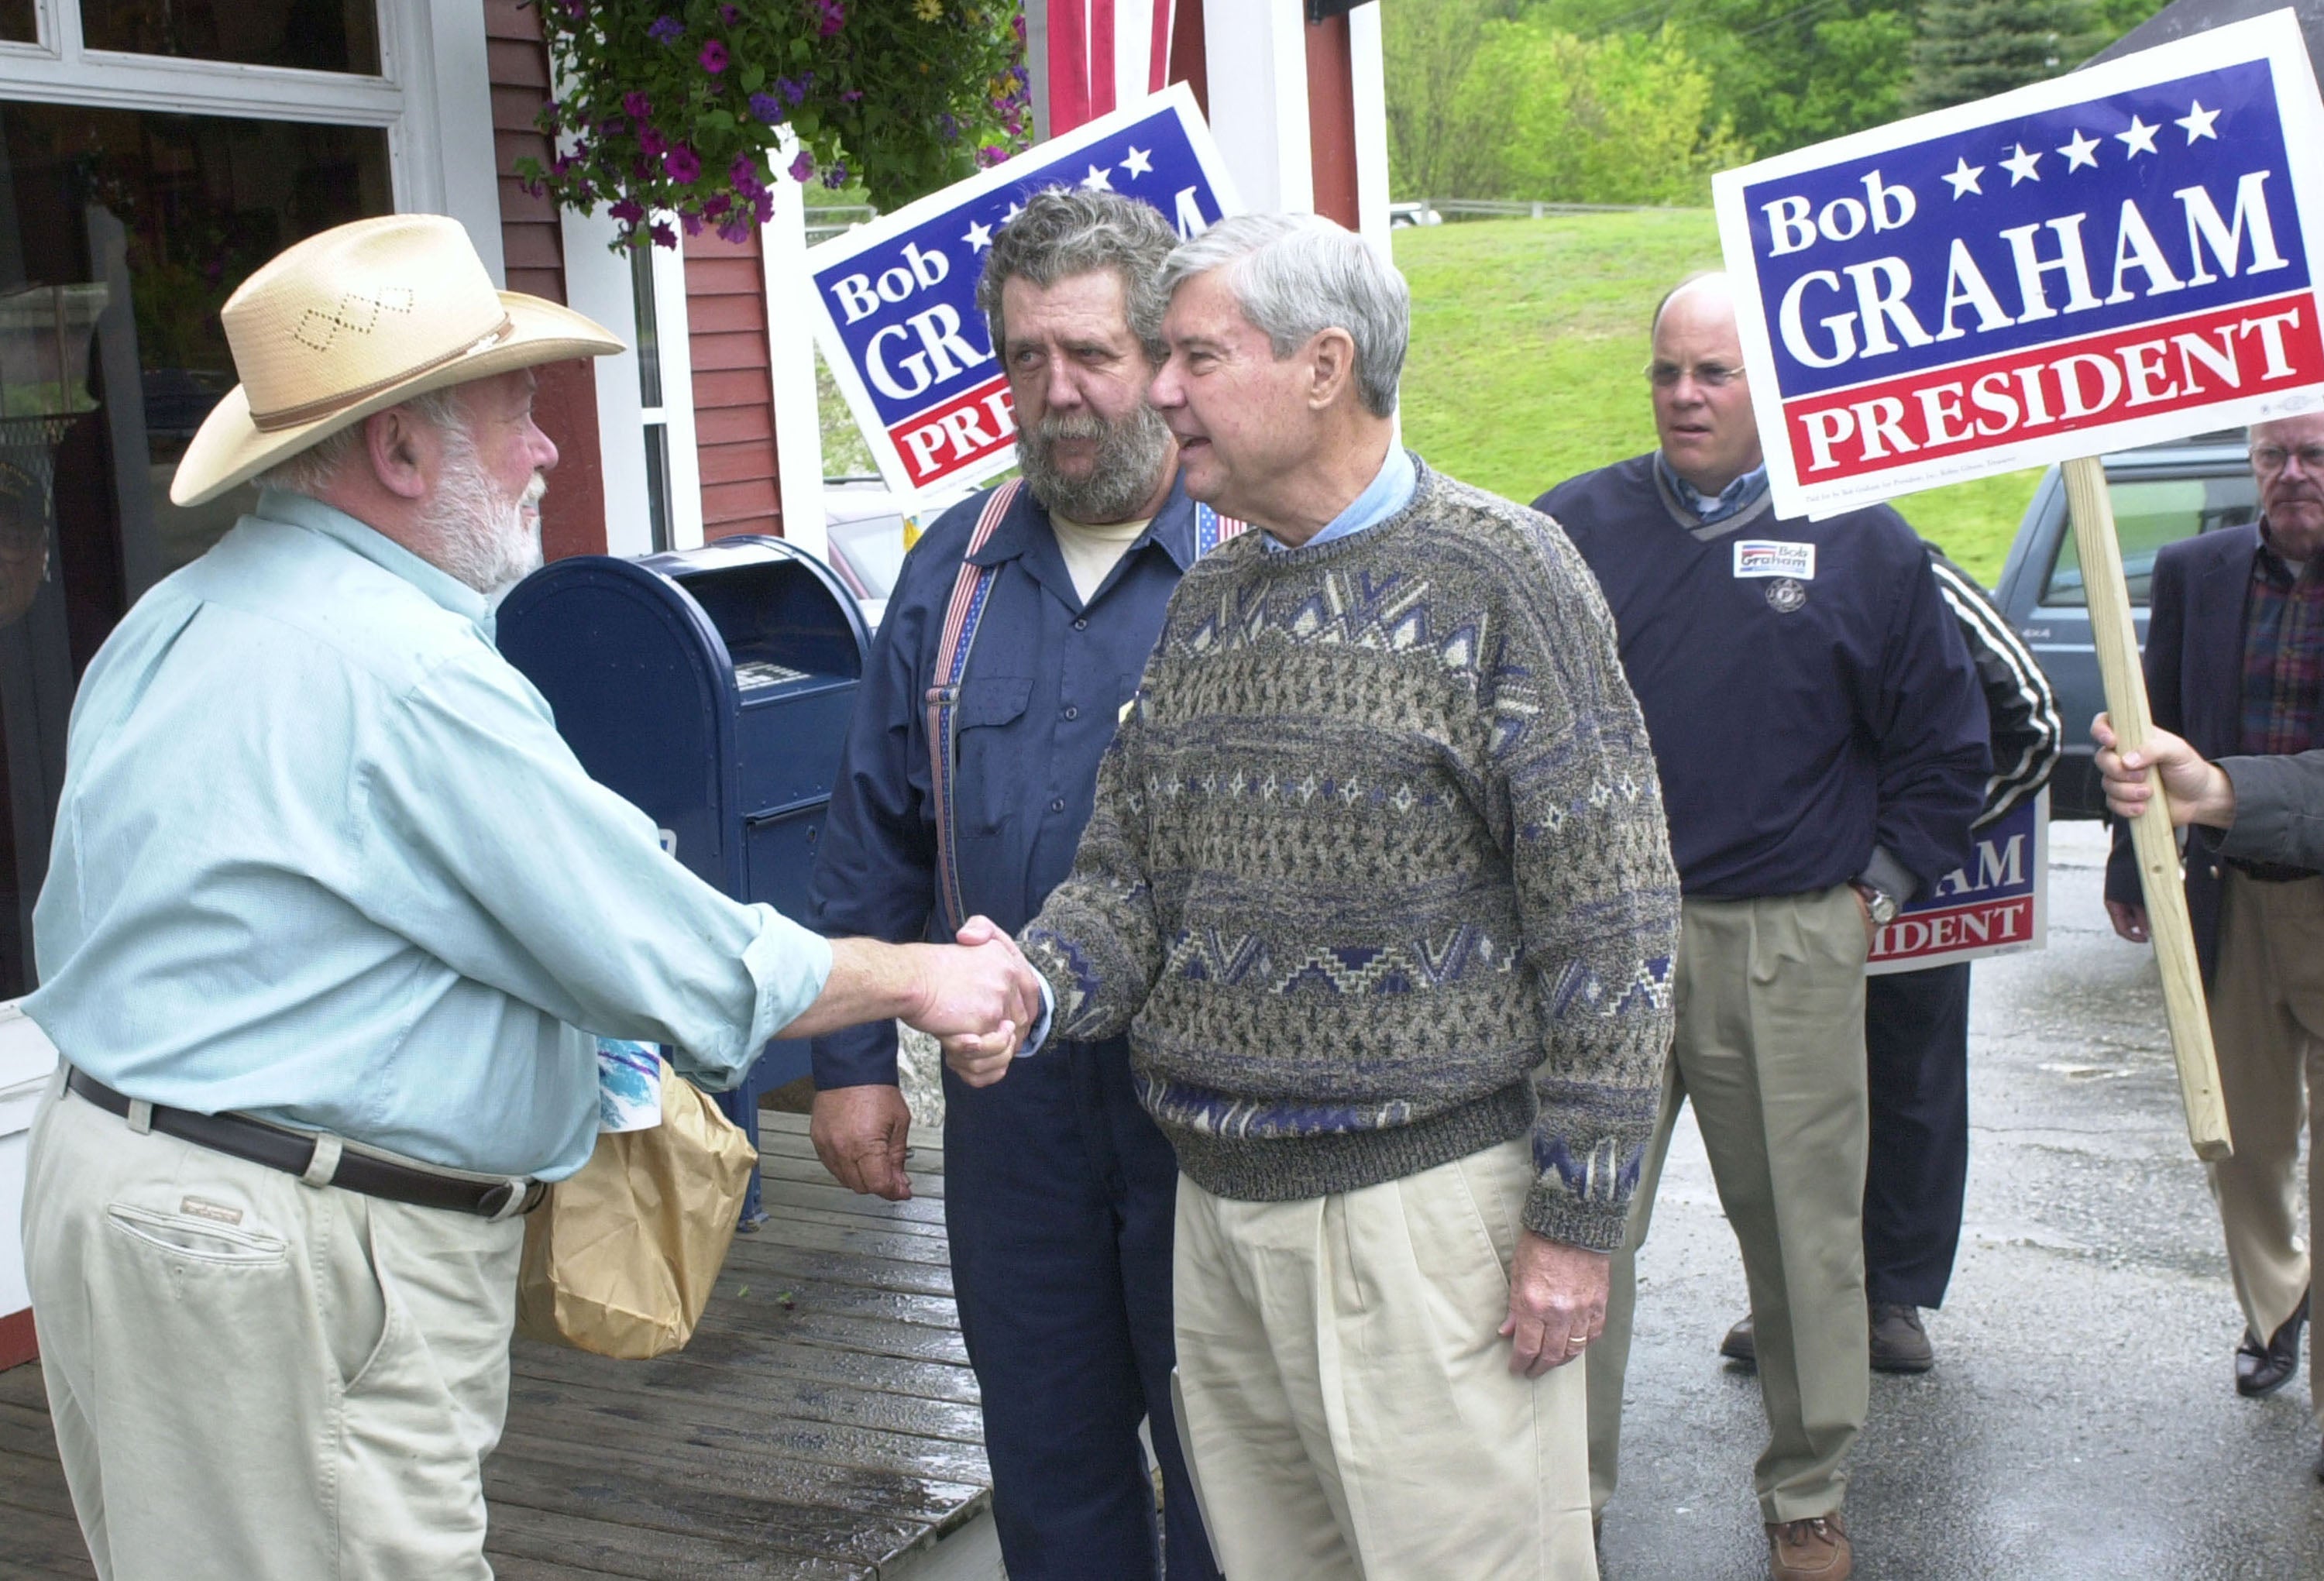 Graham campaigns in New Hampshire on 24 May 2003